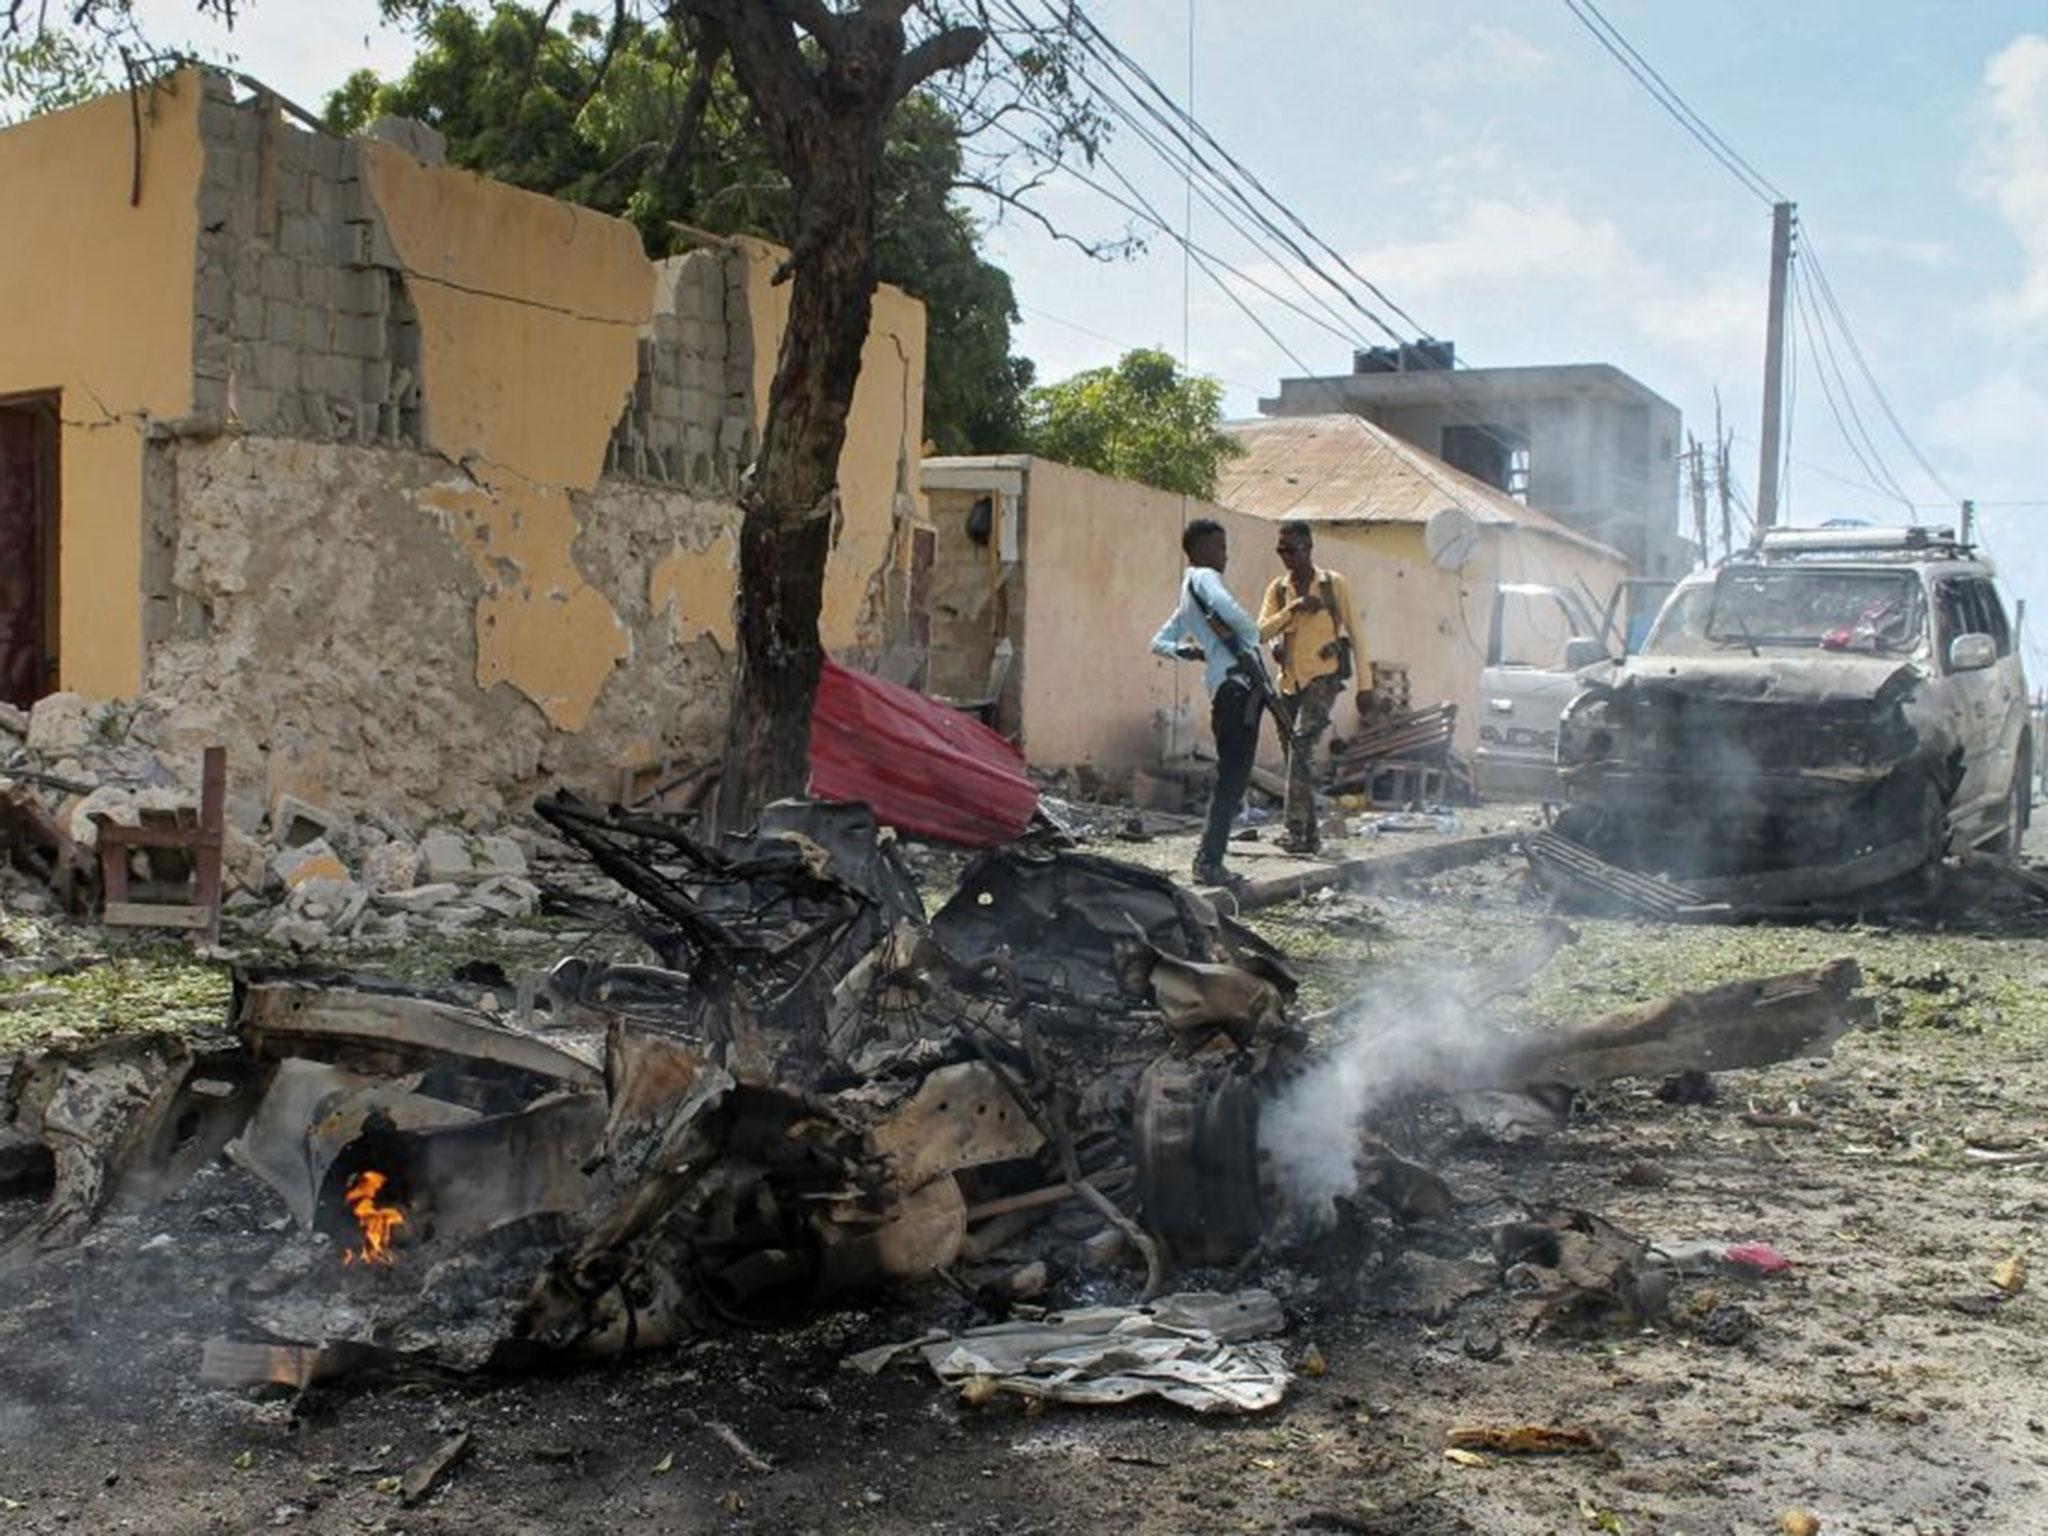 Somali security officers gather at the scene of a car bomb attack at the base for the African Union forces in Mogadishu, Somalia, 26 July, 2016